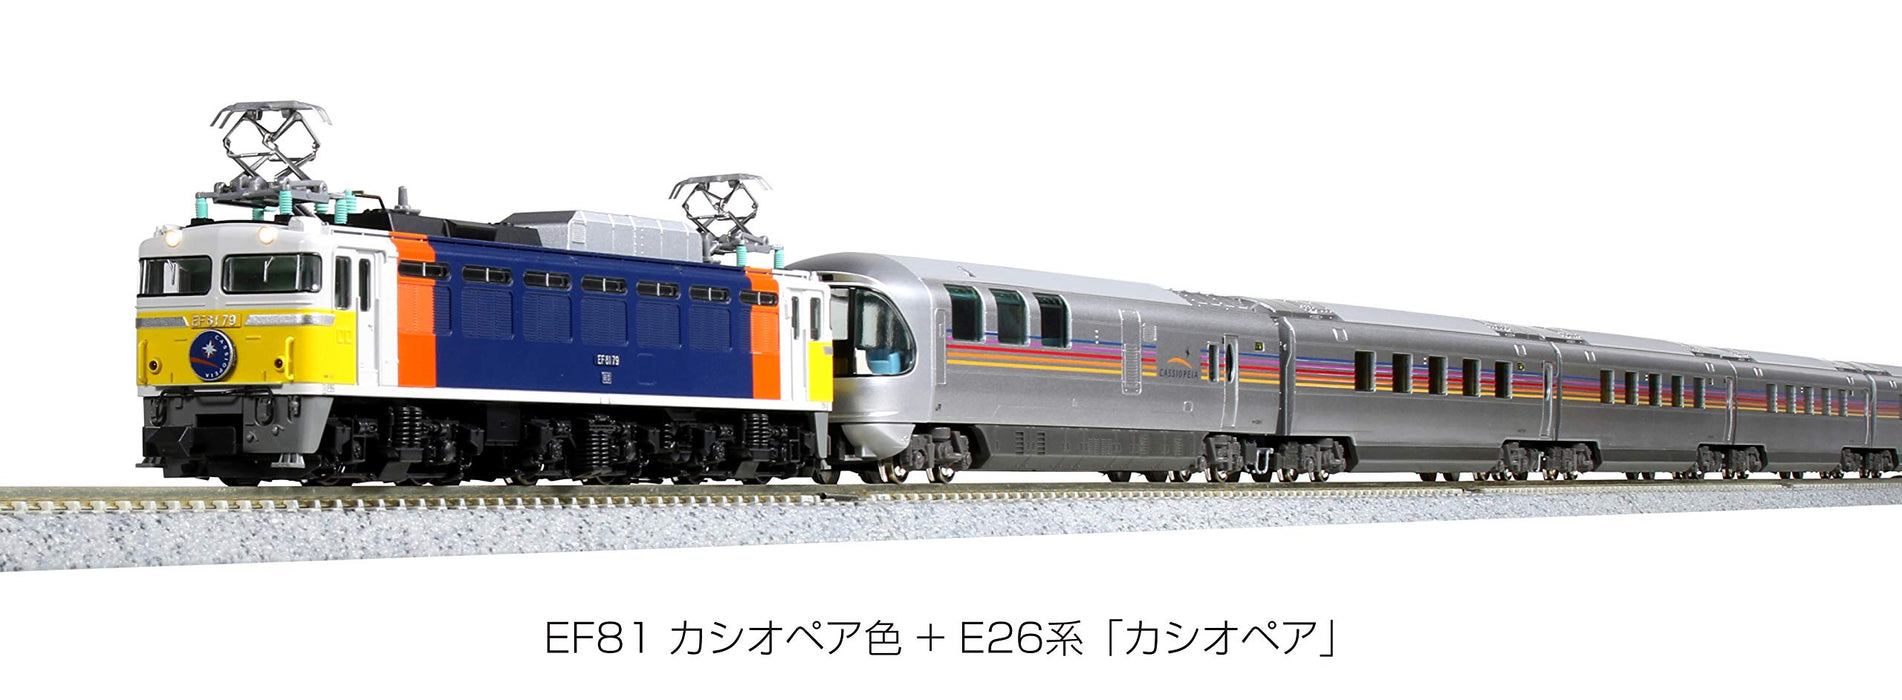 Kato N Gauge 3066-A Electric Locomotive Railway Model in Cassiopeia Color